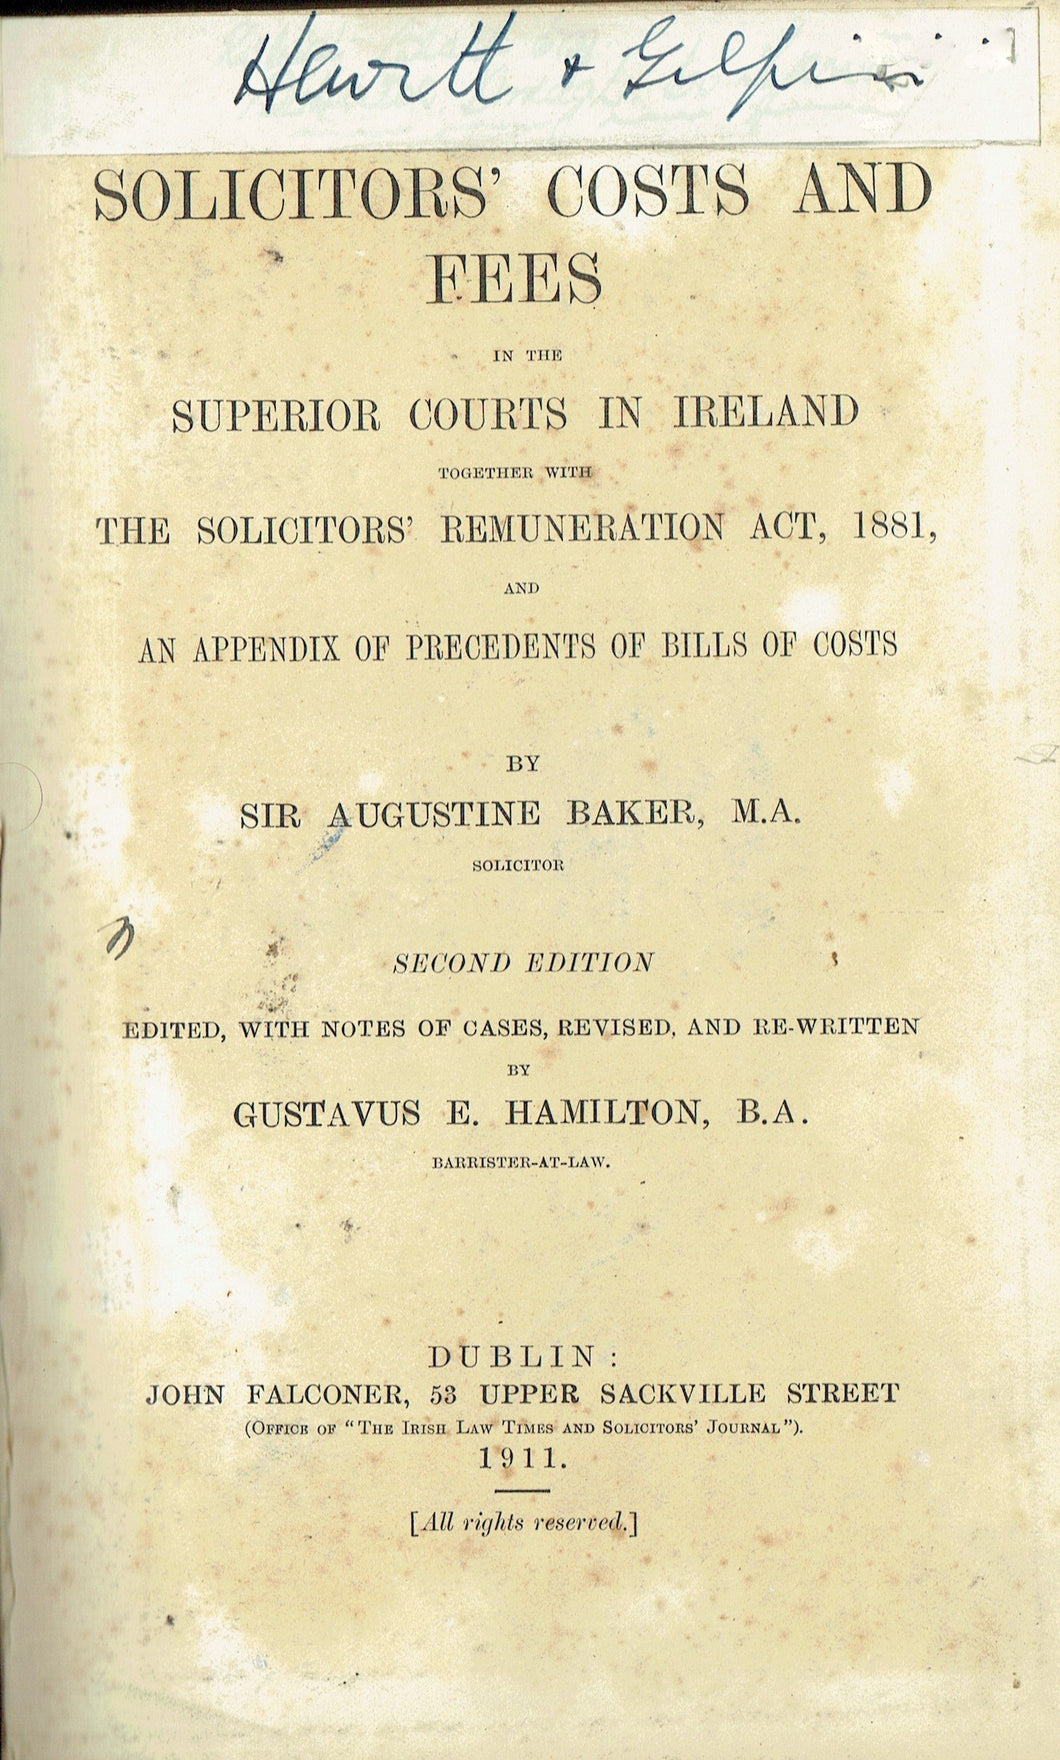 Baker's Solicitors' Costs, Second Edition: Solicitors' Costs and Fees in the Superior Costs in Ireland together with the Solicitors' Remuneration Act, 1881, and An Appendix of Precedents of Bills of Costs